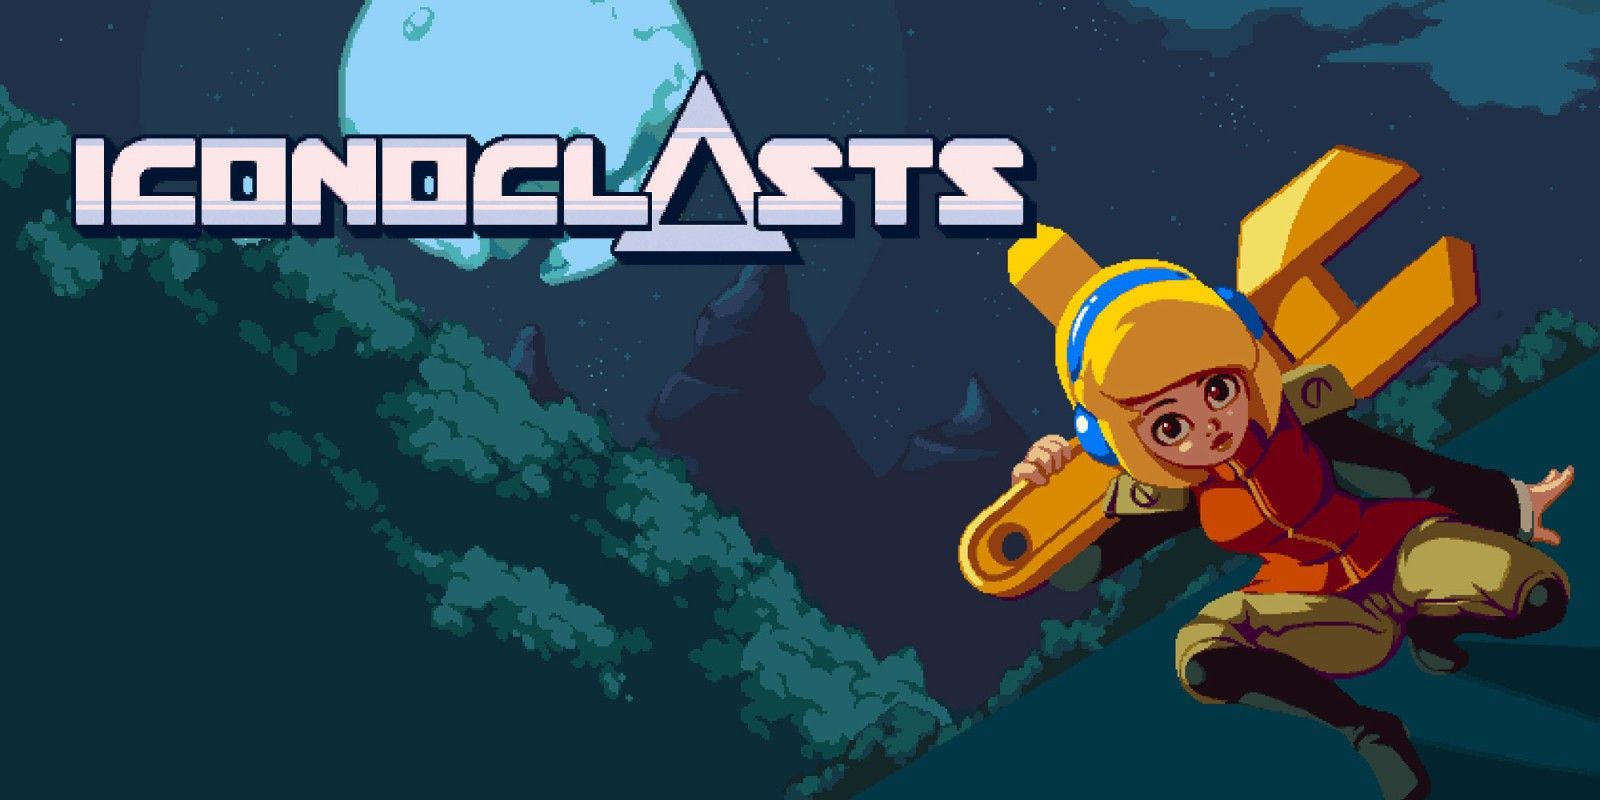 A screenshot shows the title of Iconoclasts